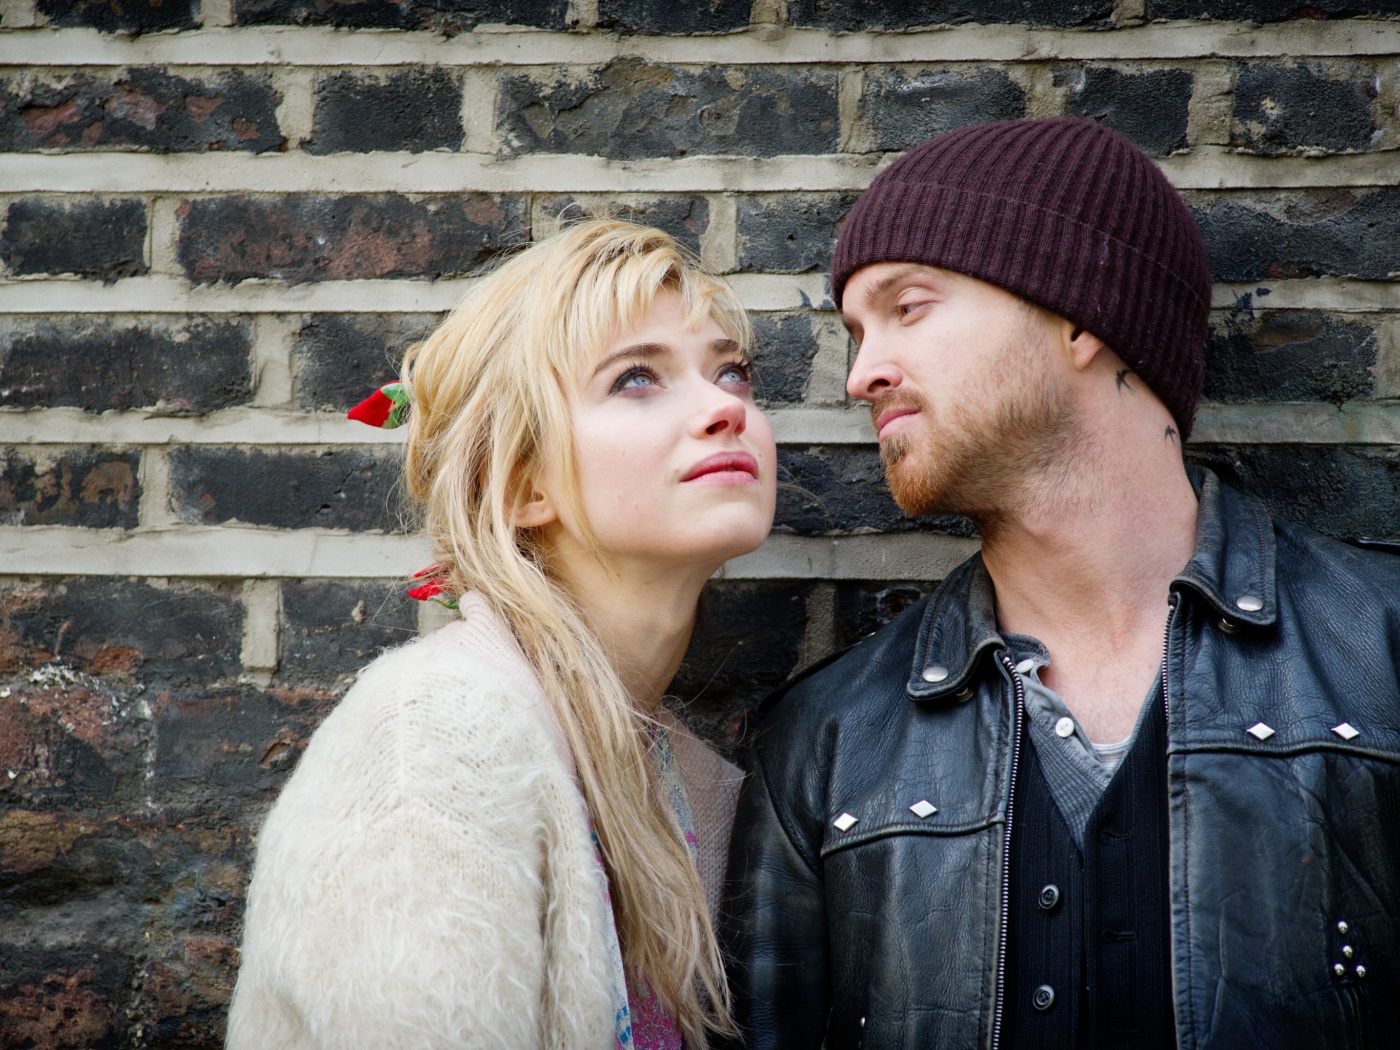 A Long Way Down with Aaron Paul and Imogen Poots screenshot #1 1400x1050